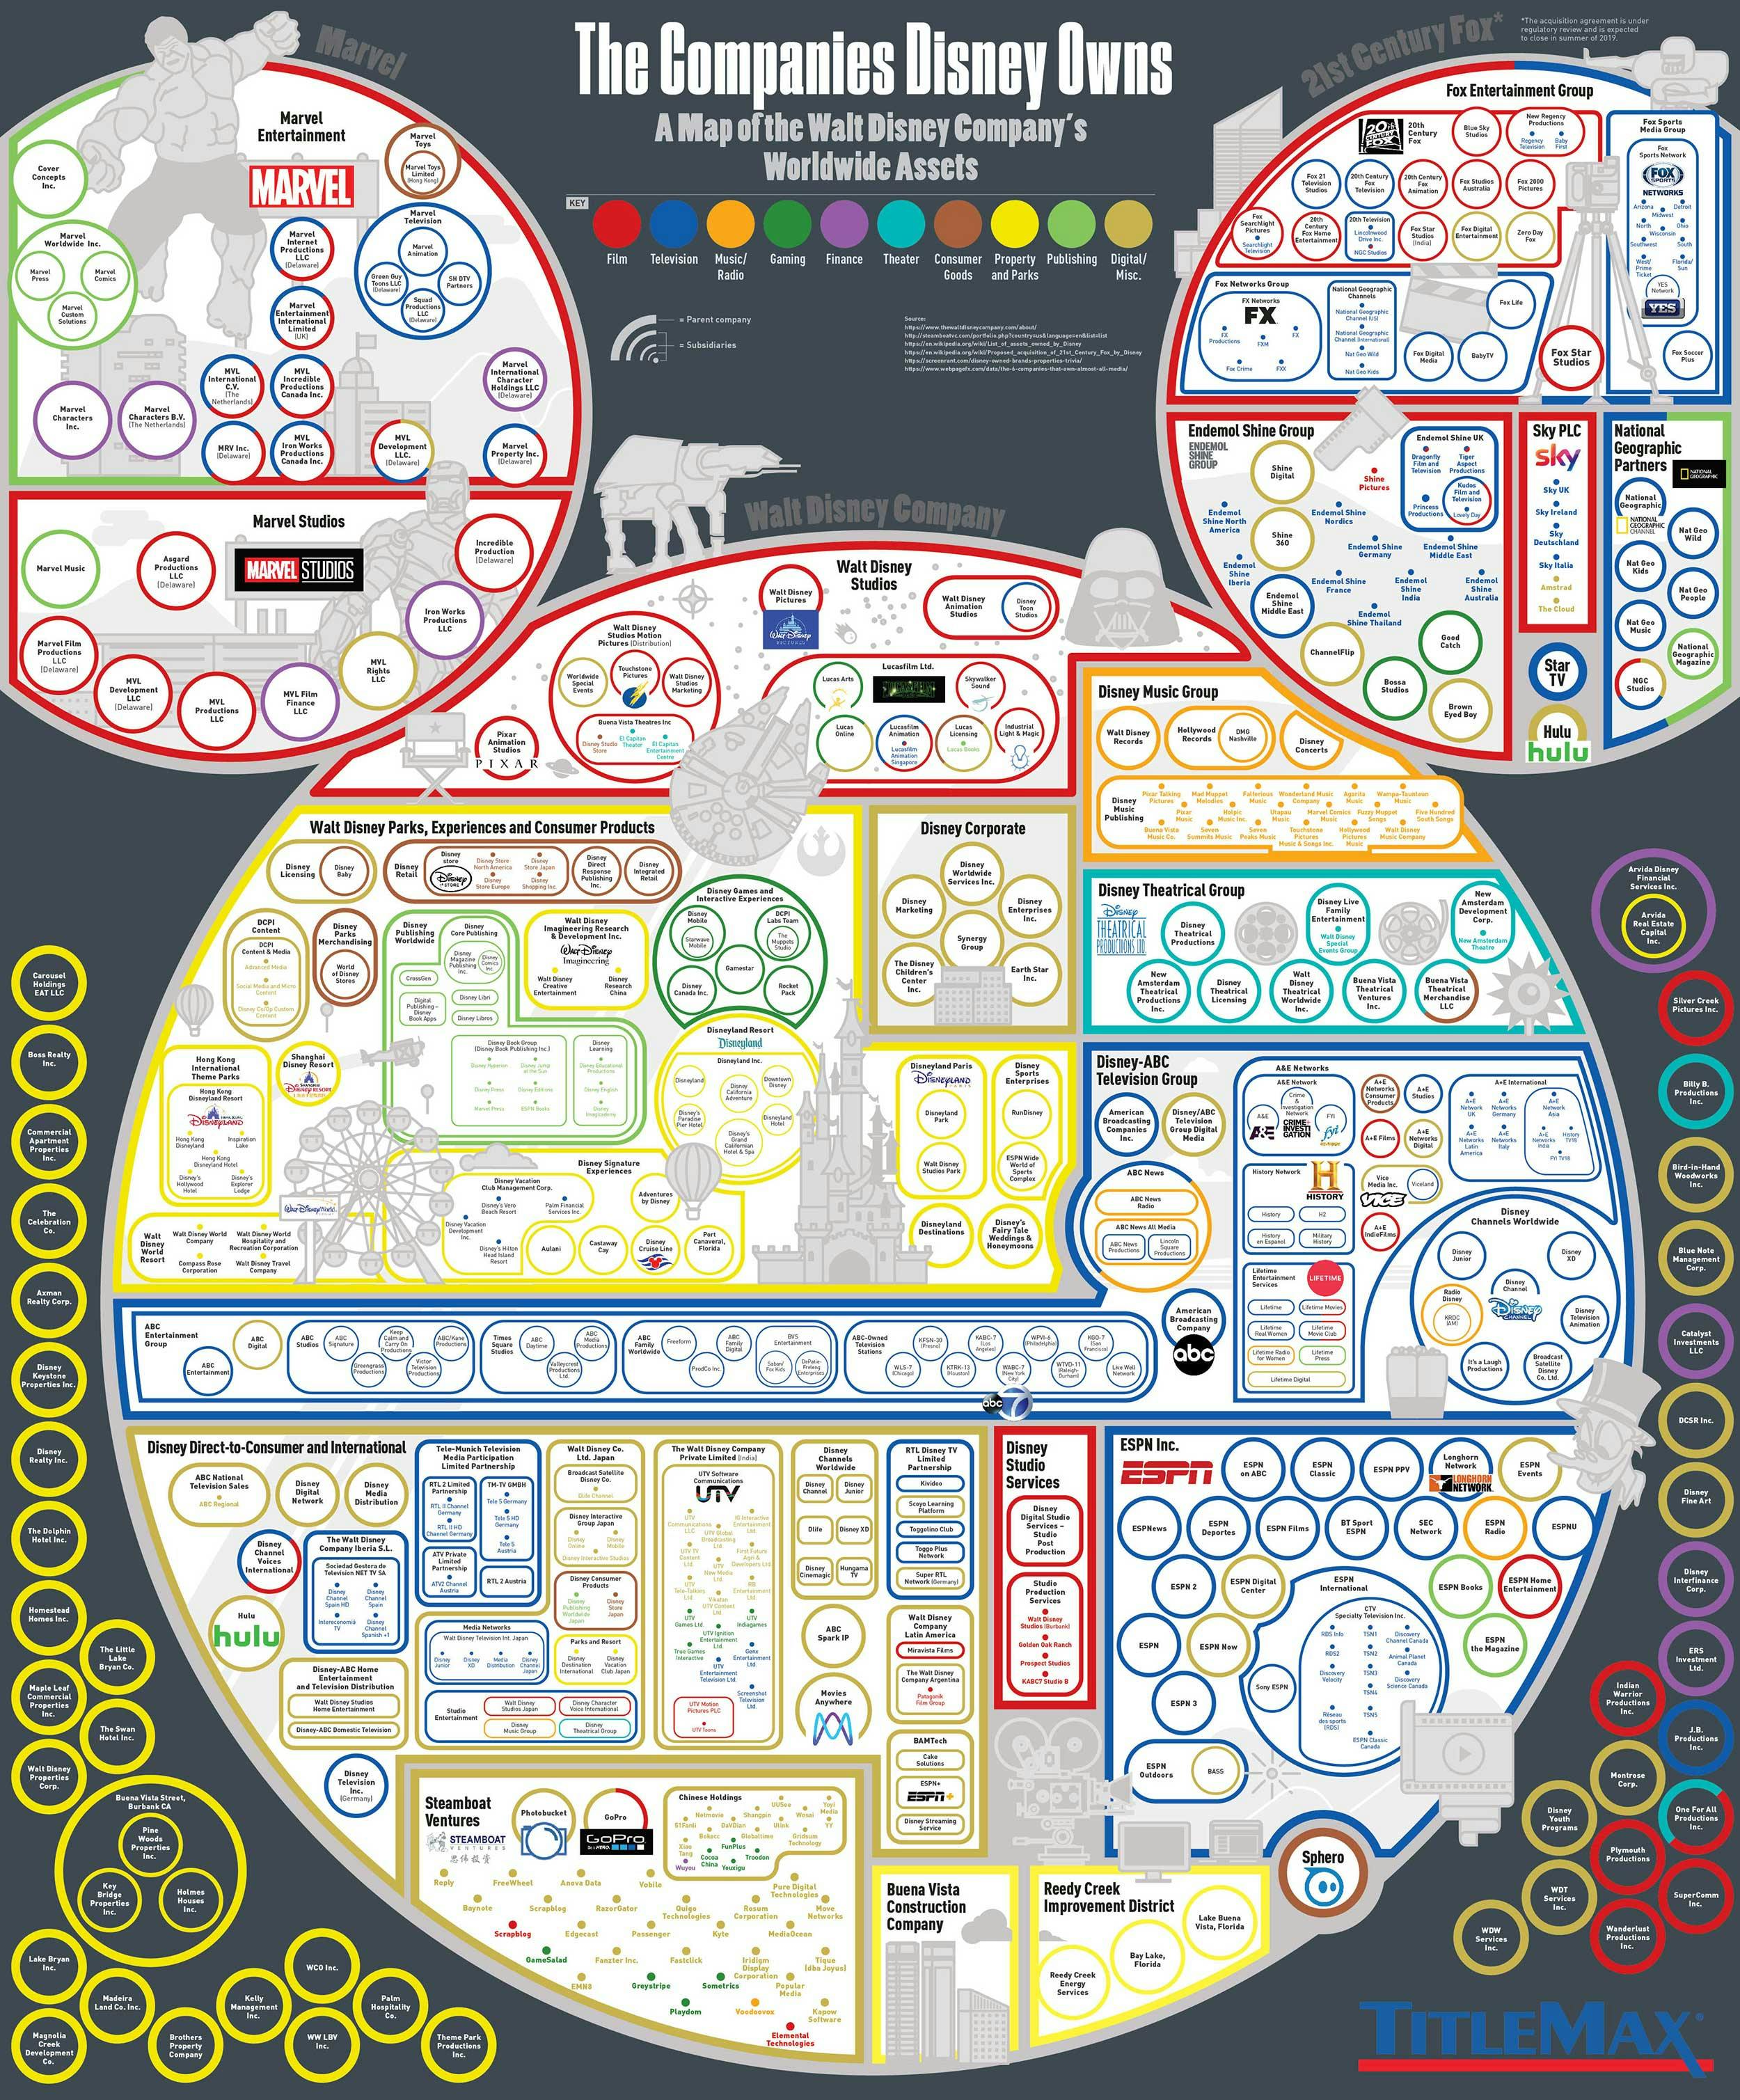 A huge chart showing hundreds of media companies owned by Disney. Credit: TitleMax